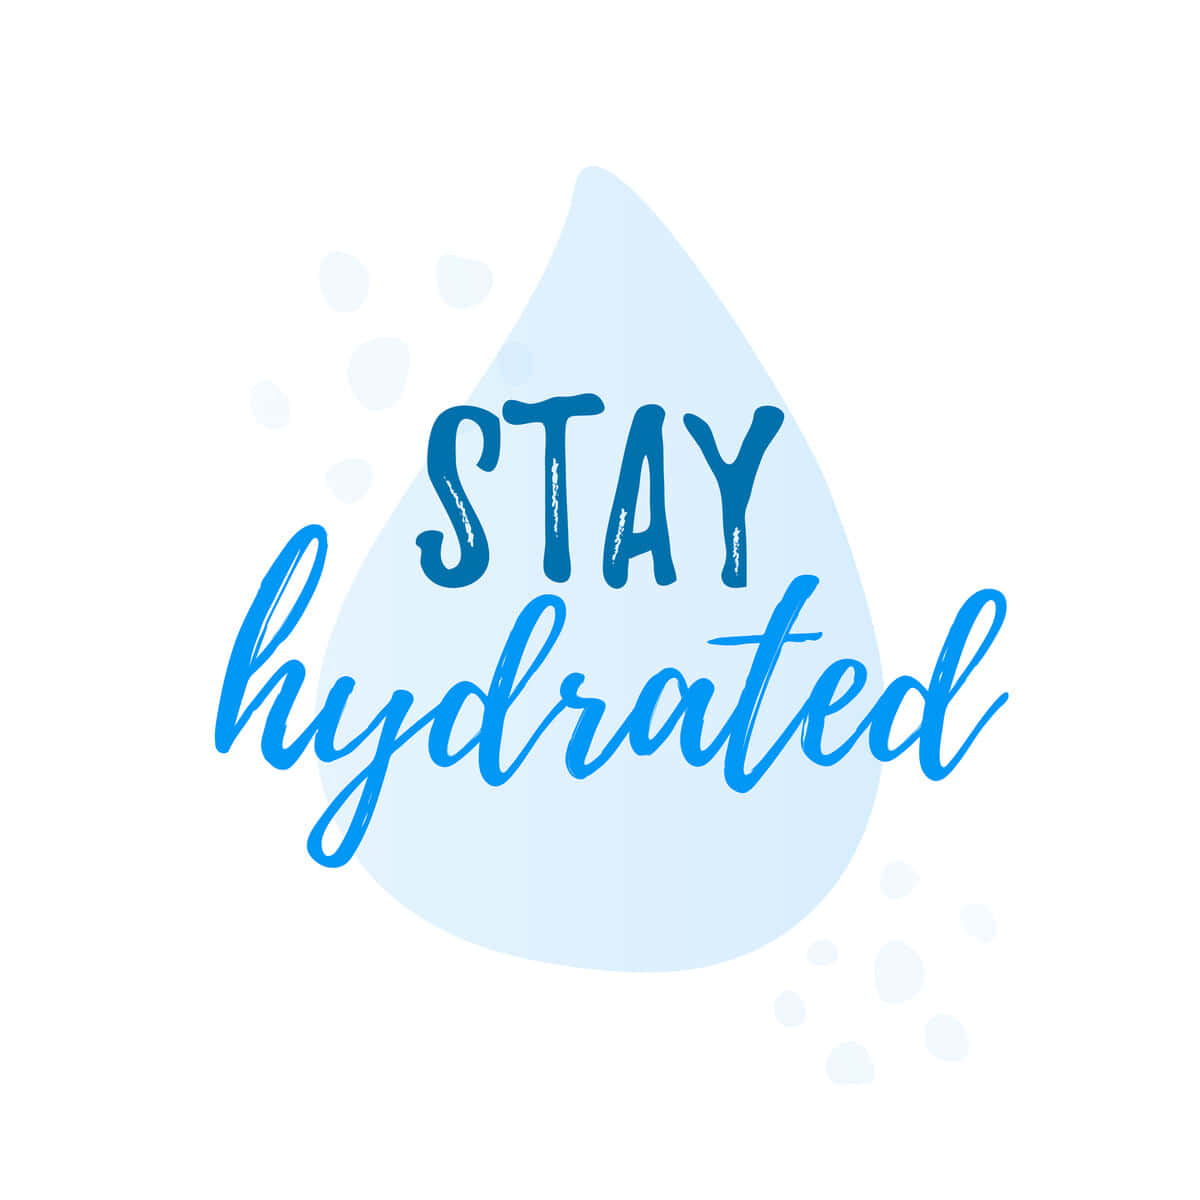 Stay Hydrated Wallpaper